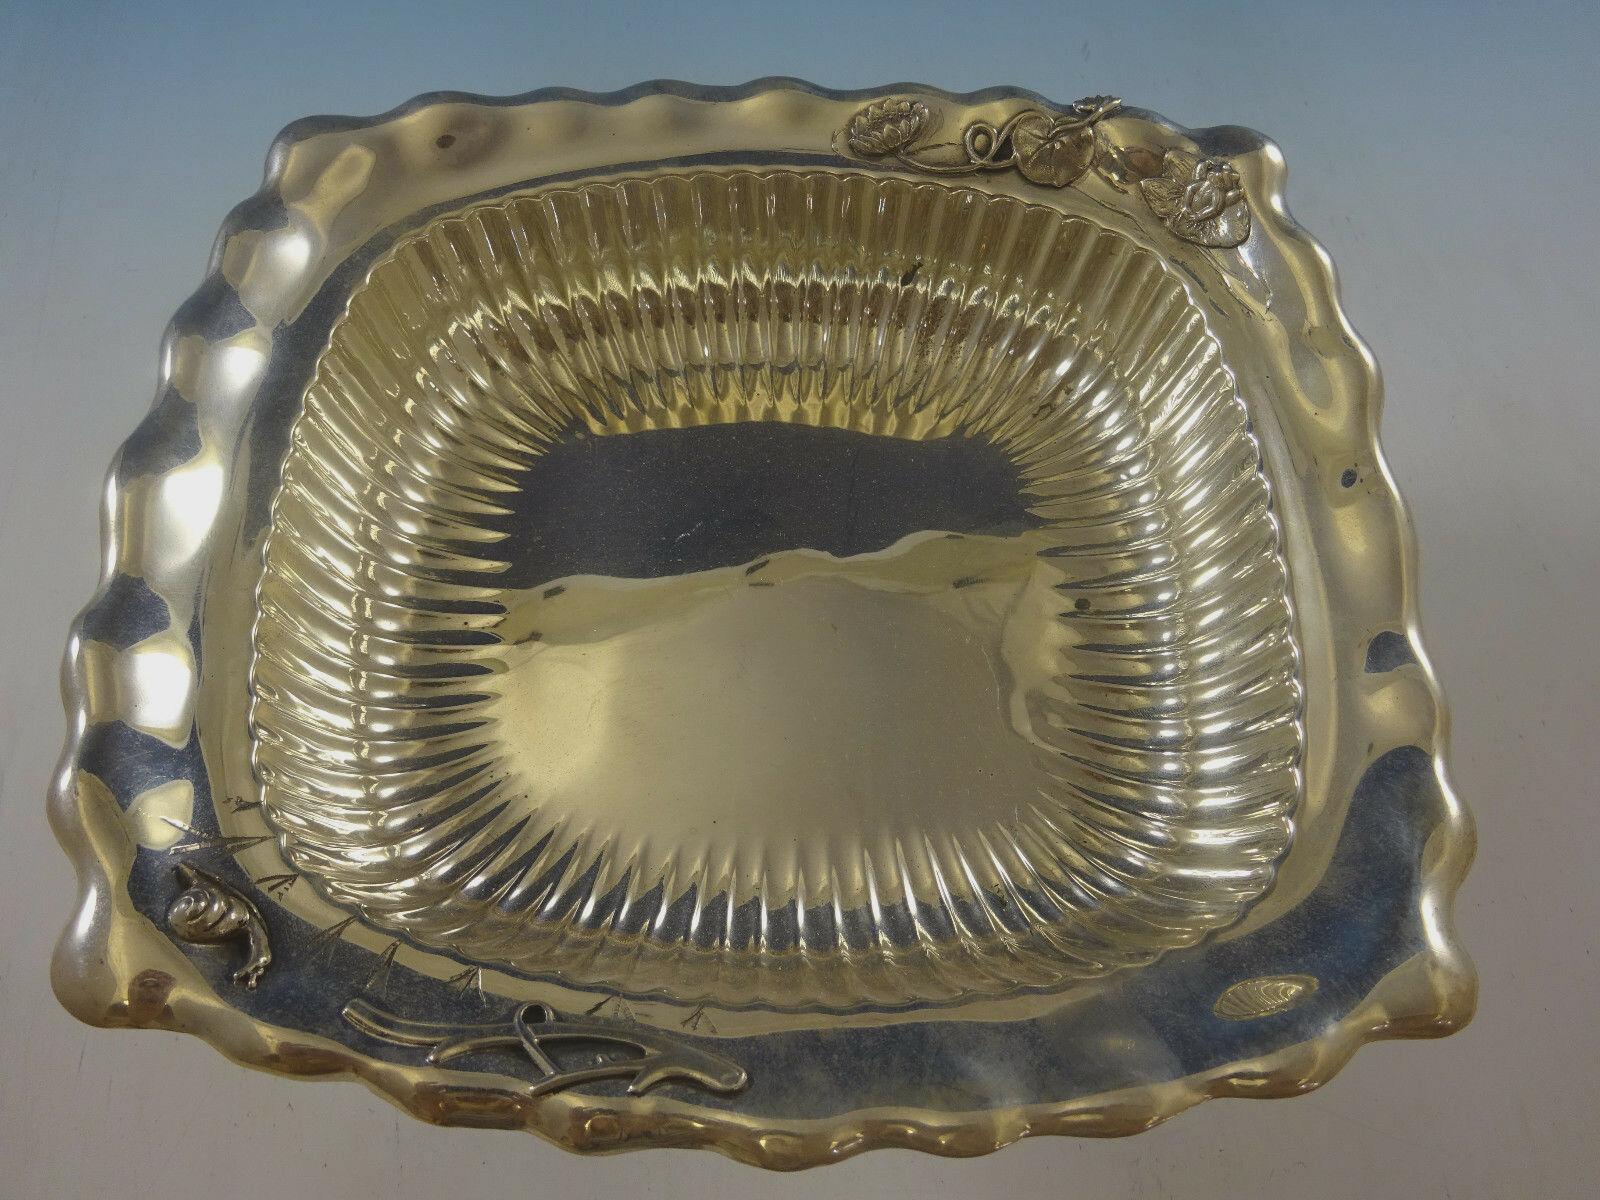 Whiting
Whiting sterling rectangular bowl with beautiful ruffled edge and interior fluting. It features an applied frog, snail, branch, and lily pads with flower. It's marked with #2048. The bowl measures 1 1/2